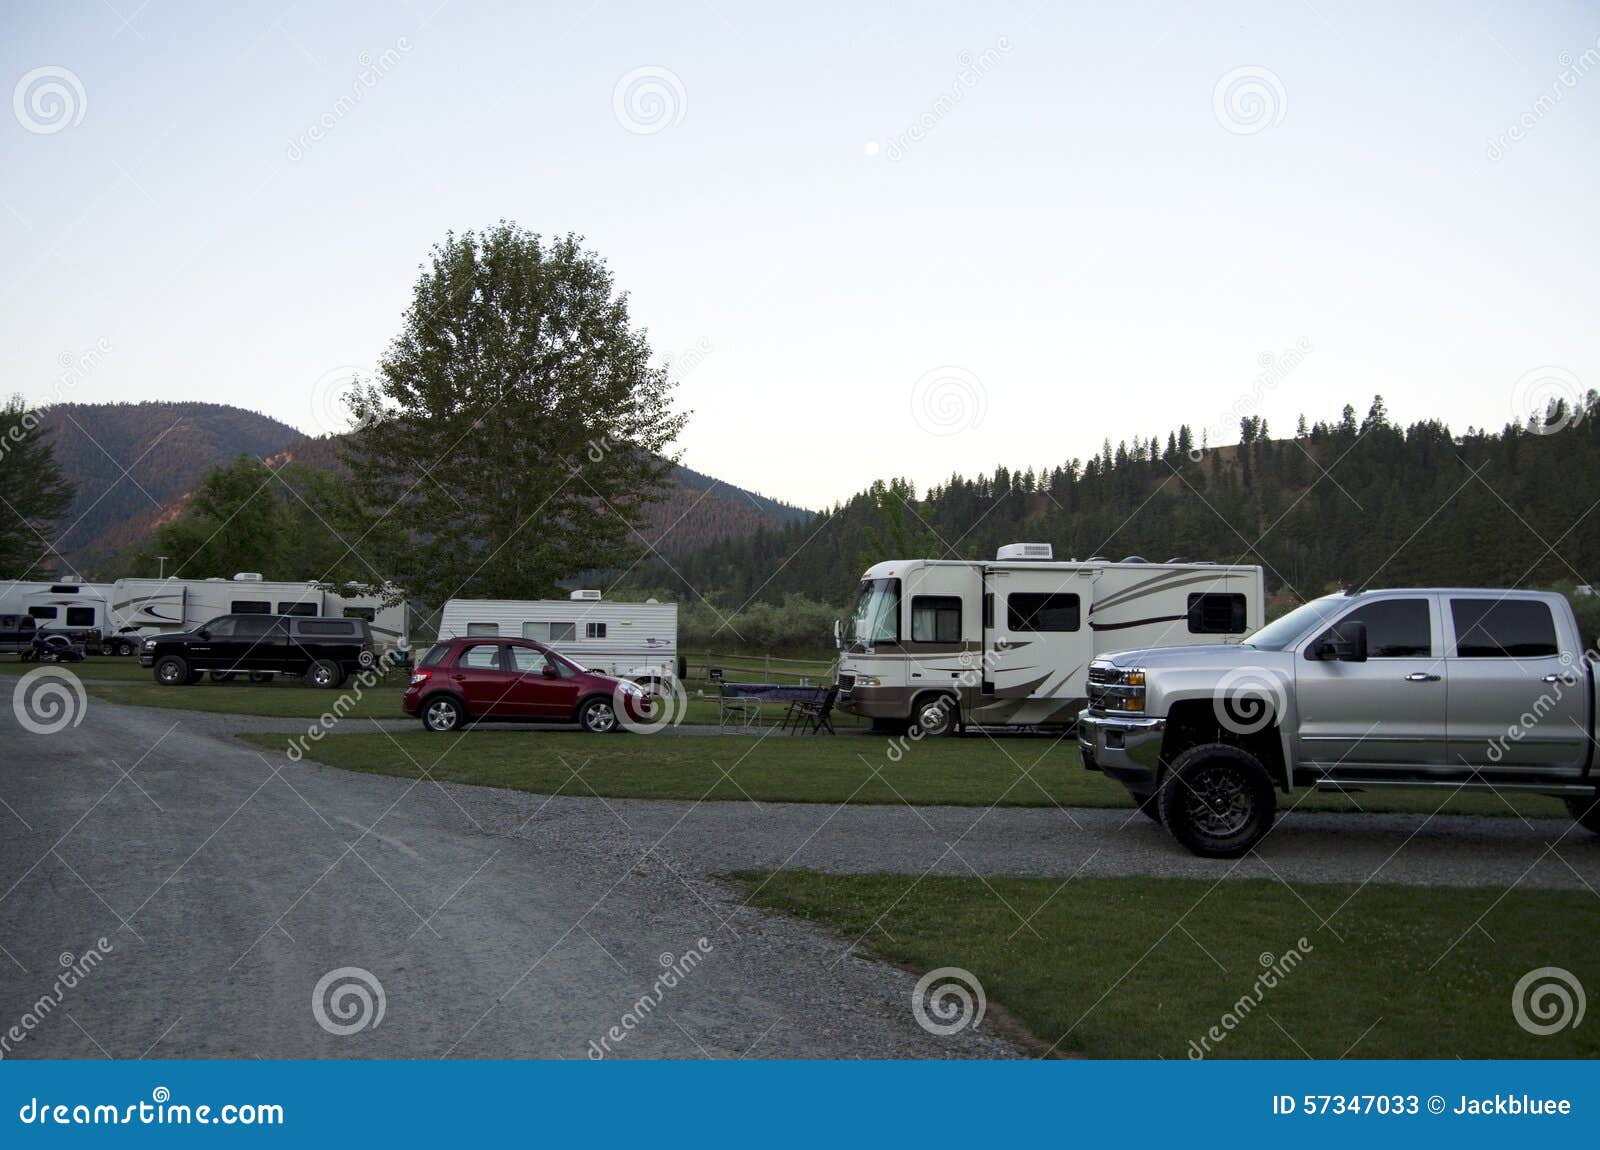 RV campground stock image. Image of relaxatioin, nature - 57347033